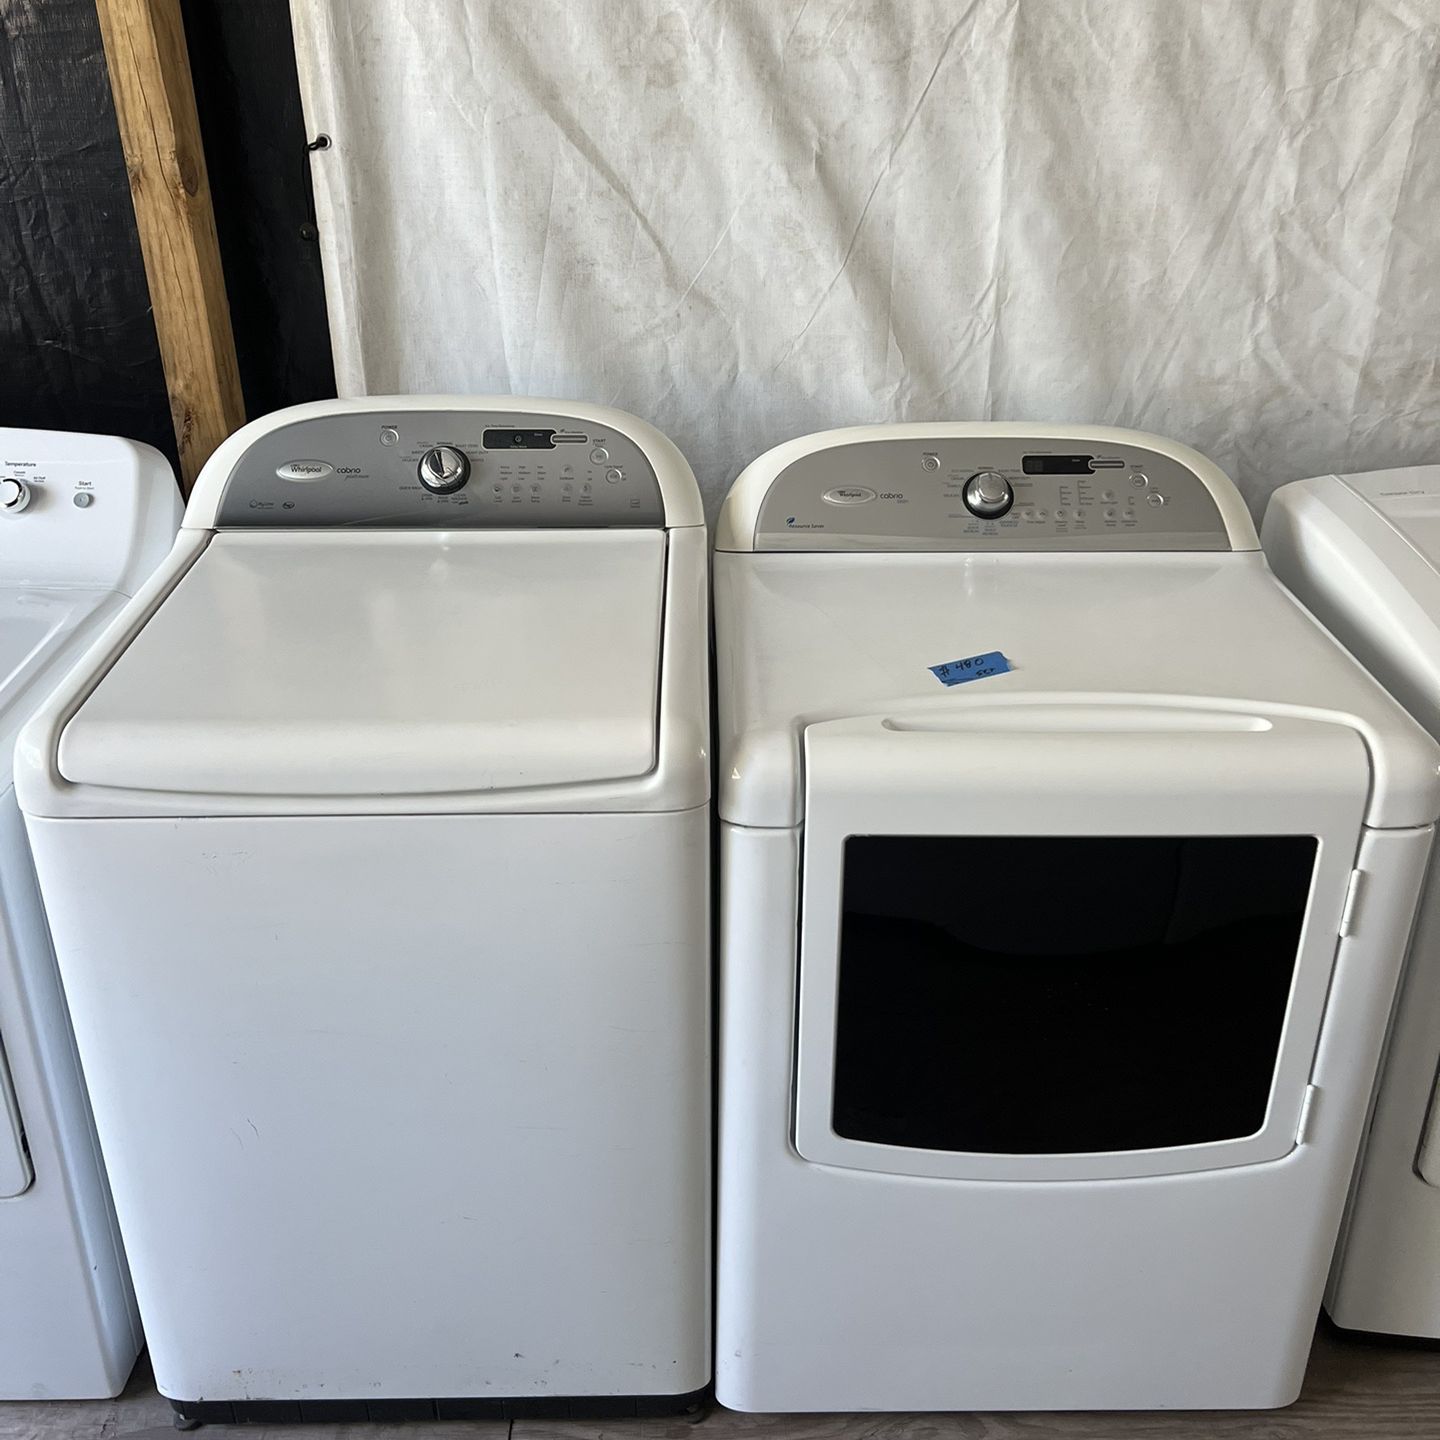 Whirlpool Washer&dryer Large Capacity Set   60 day warranty/ Located at:📍5415 Carmack Rd Tampa Fl 33610📍